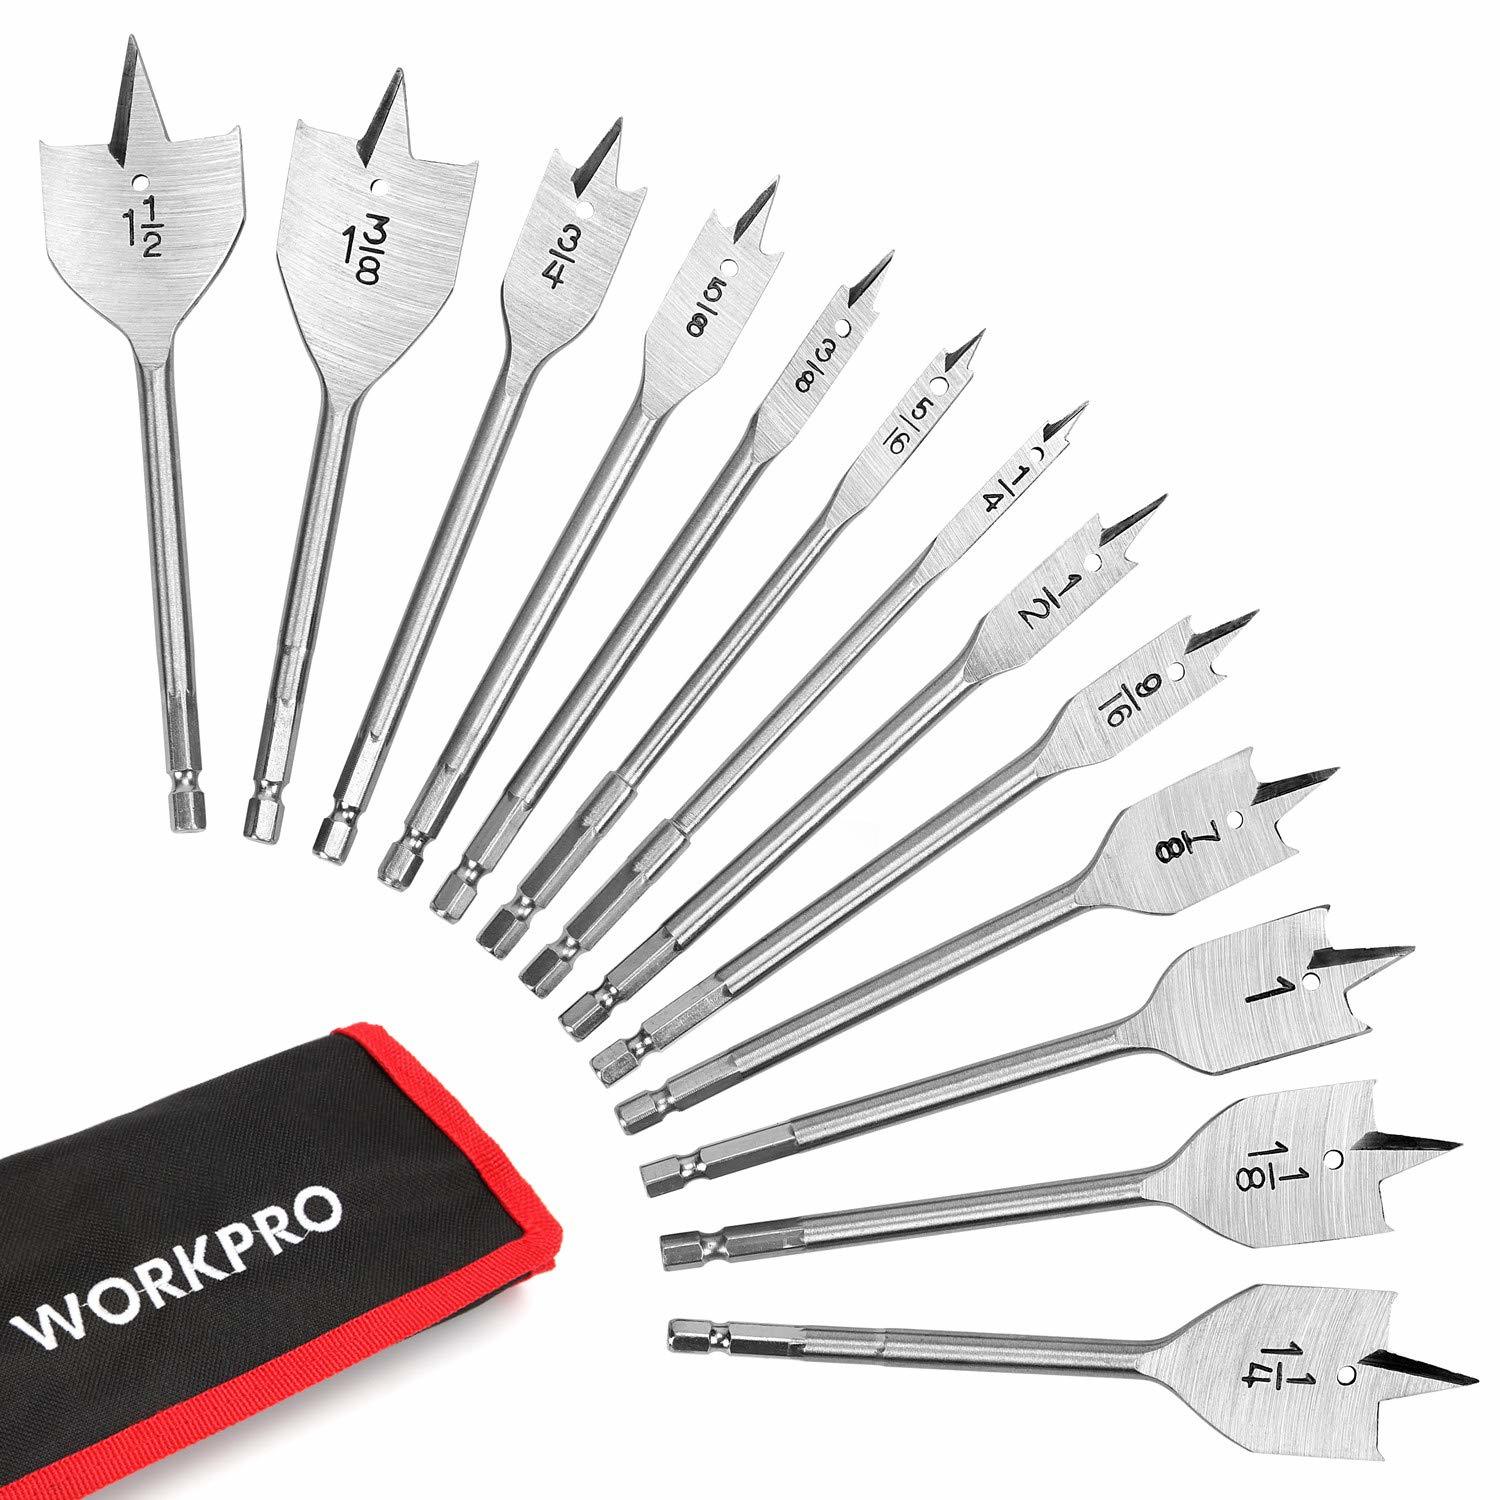 WORKPRO 13-Piece Spade Drill Bit Set in SAE, Paddle Flat Bits for Woodworking, N - $32.29